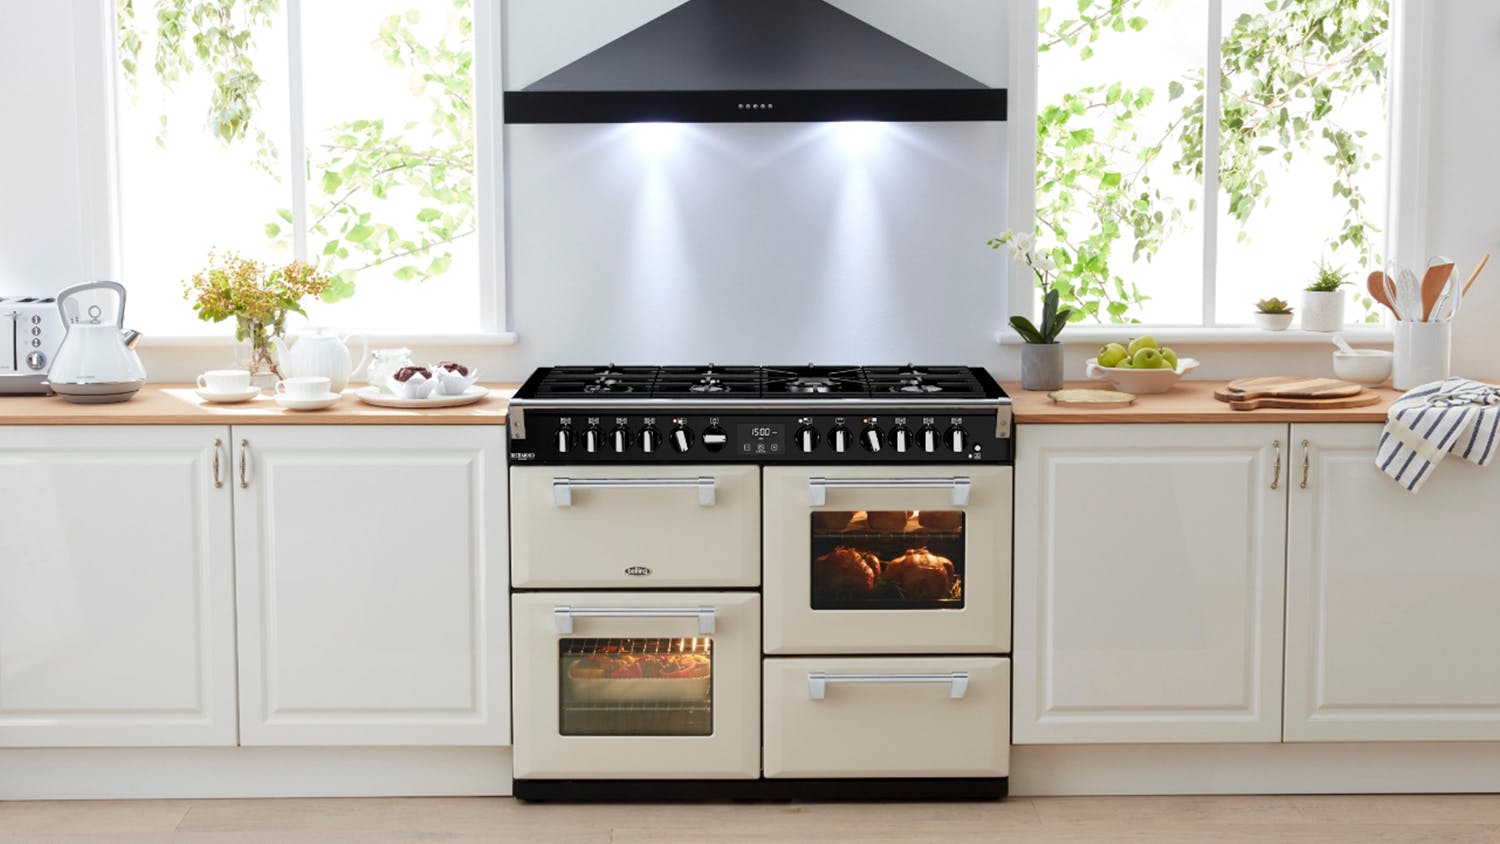 Belling 110cm Dual Fuel Freestanding Oven with Gas Cooktop - Cream (Colour Boutique/BRD1100DFCR)